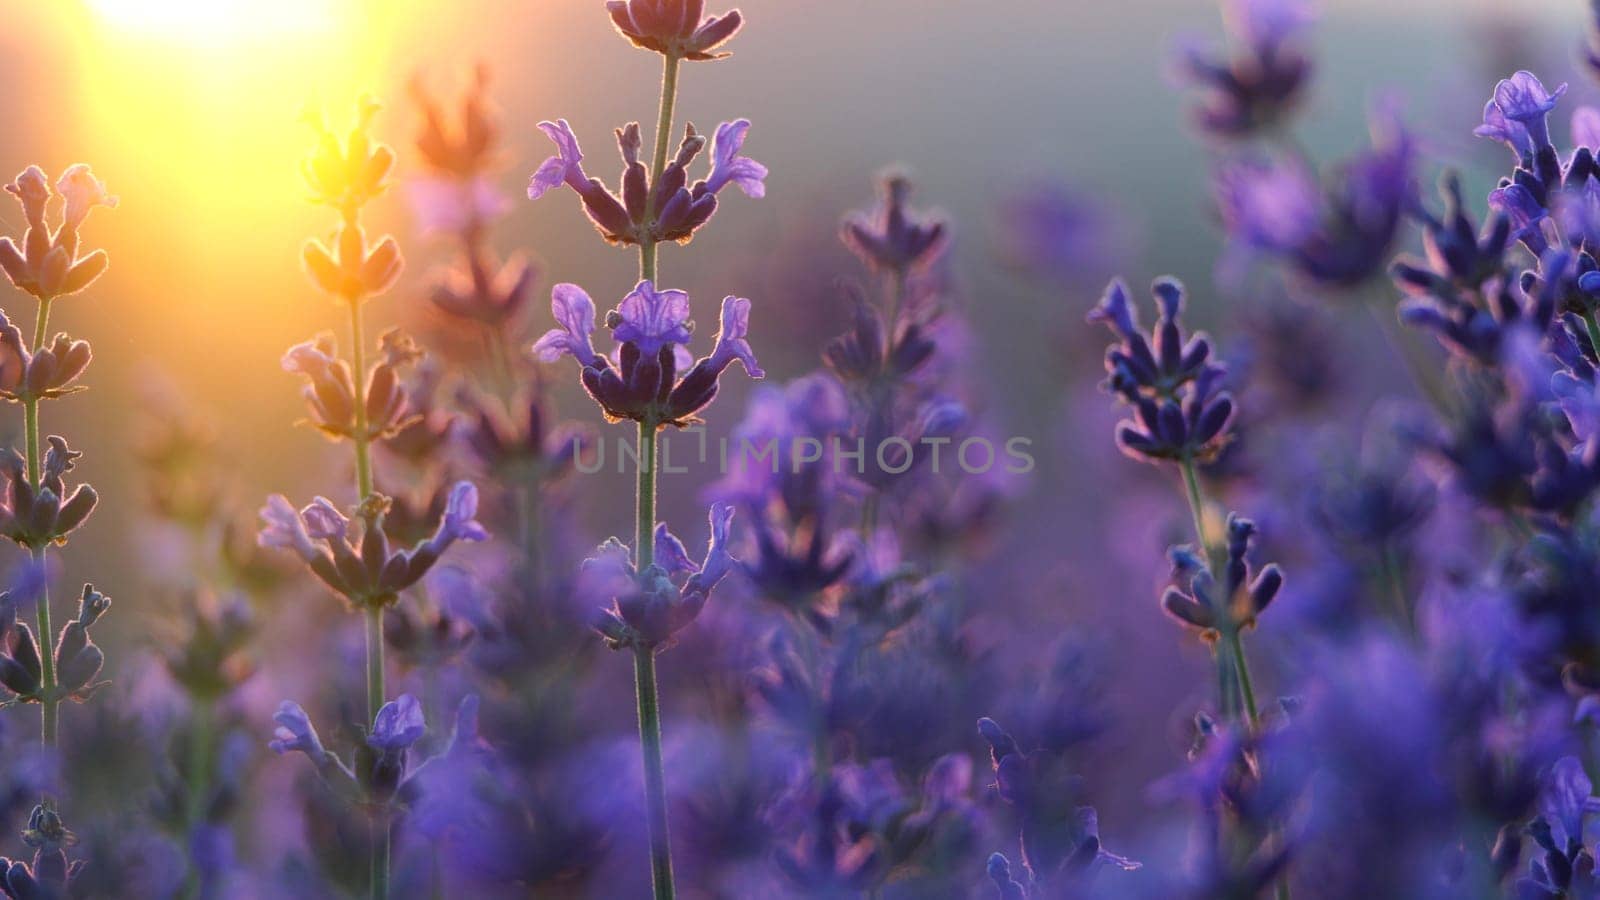 Blooming lavender field sunset. Selective focus. Lavender flower spring background with beautiful purple colors and bokeh lights. aromatherapy essential oils